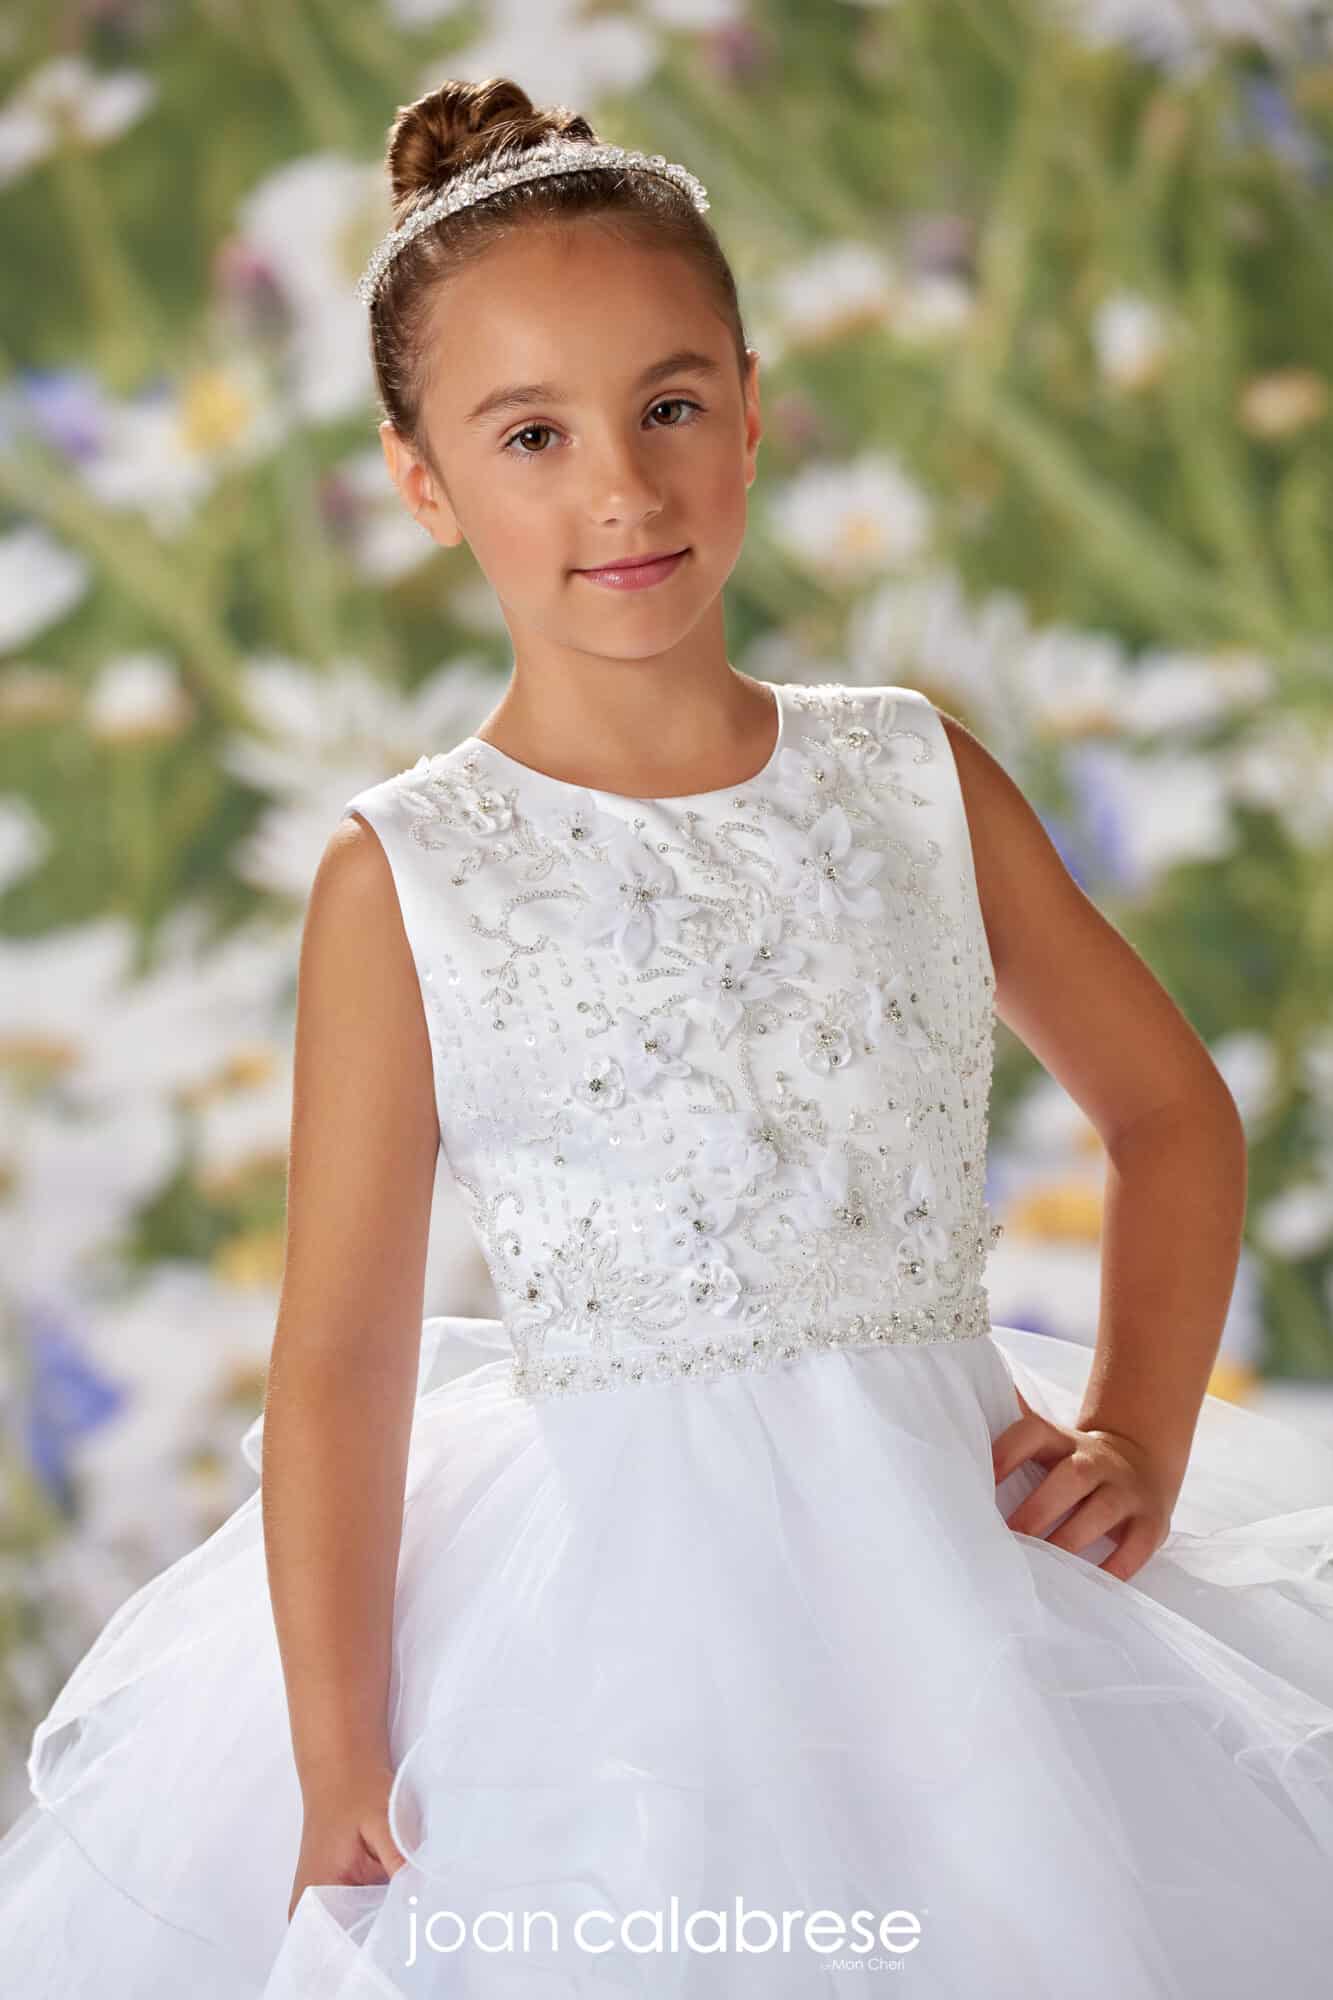 Joan Calabrese Flower Girl Dress Collection | Bridal Reflections